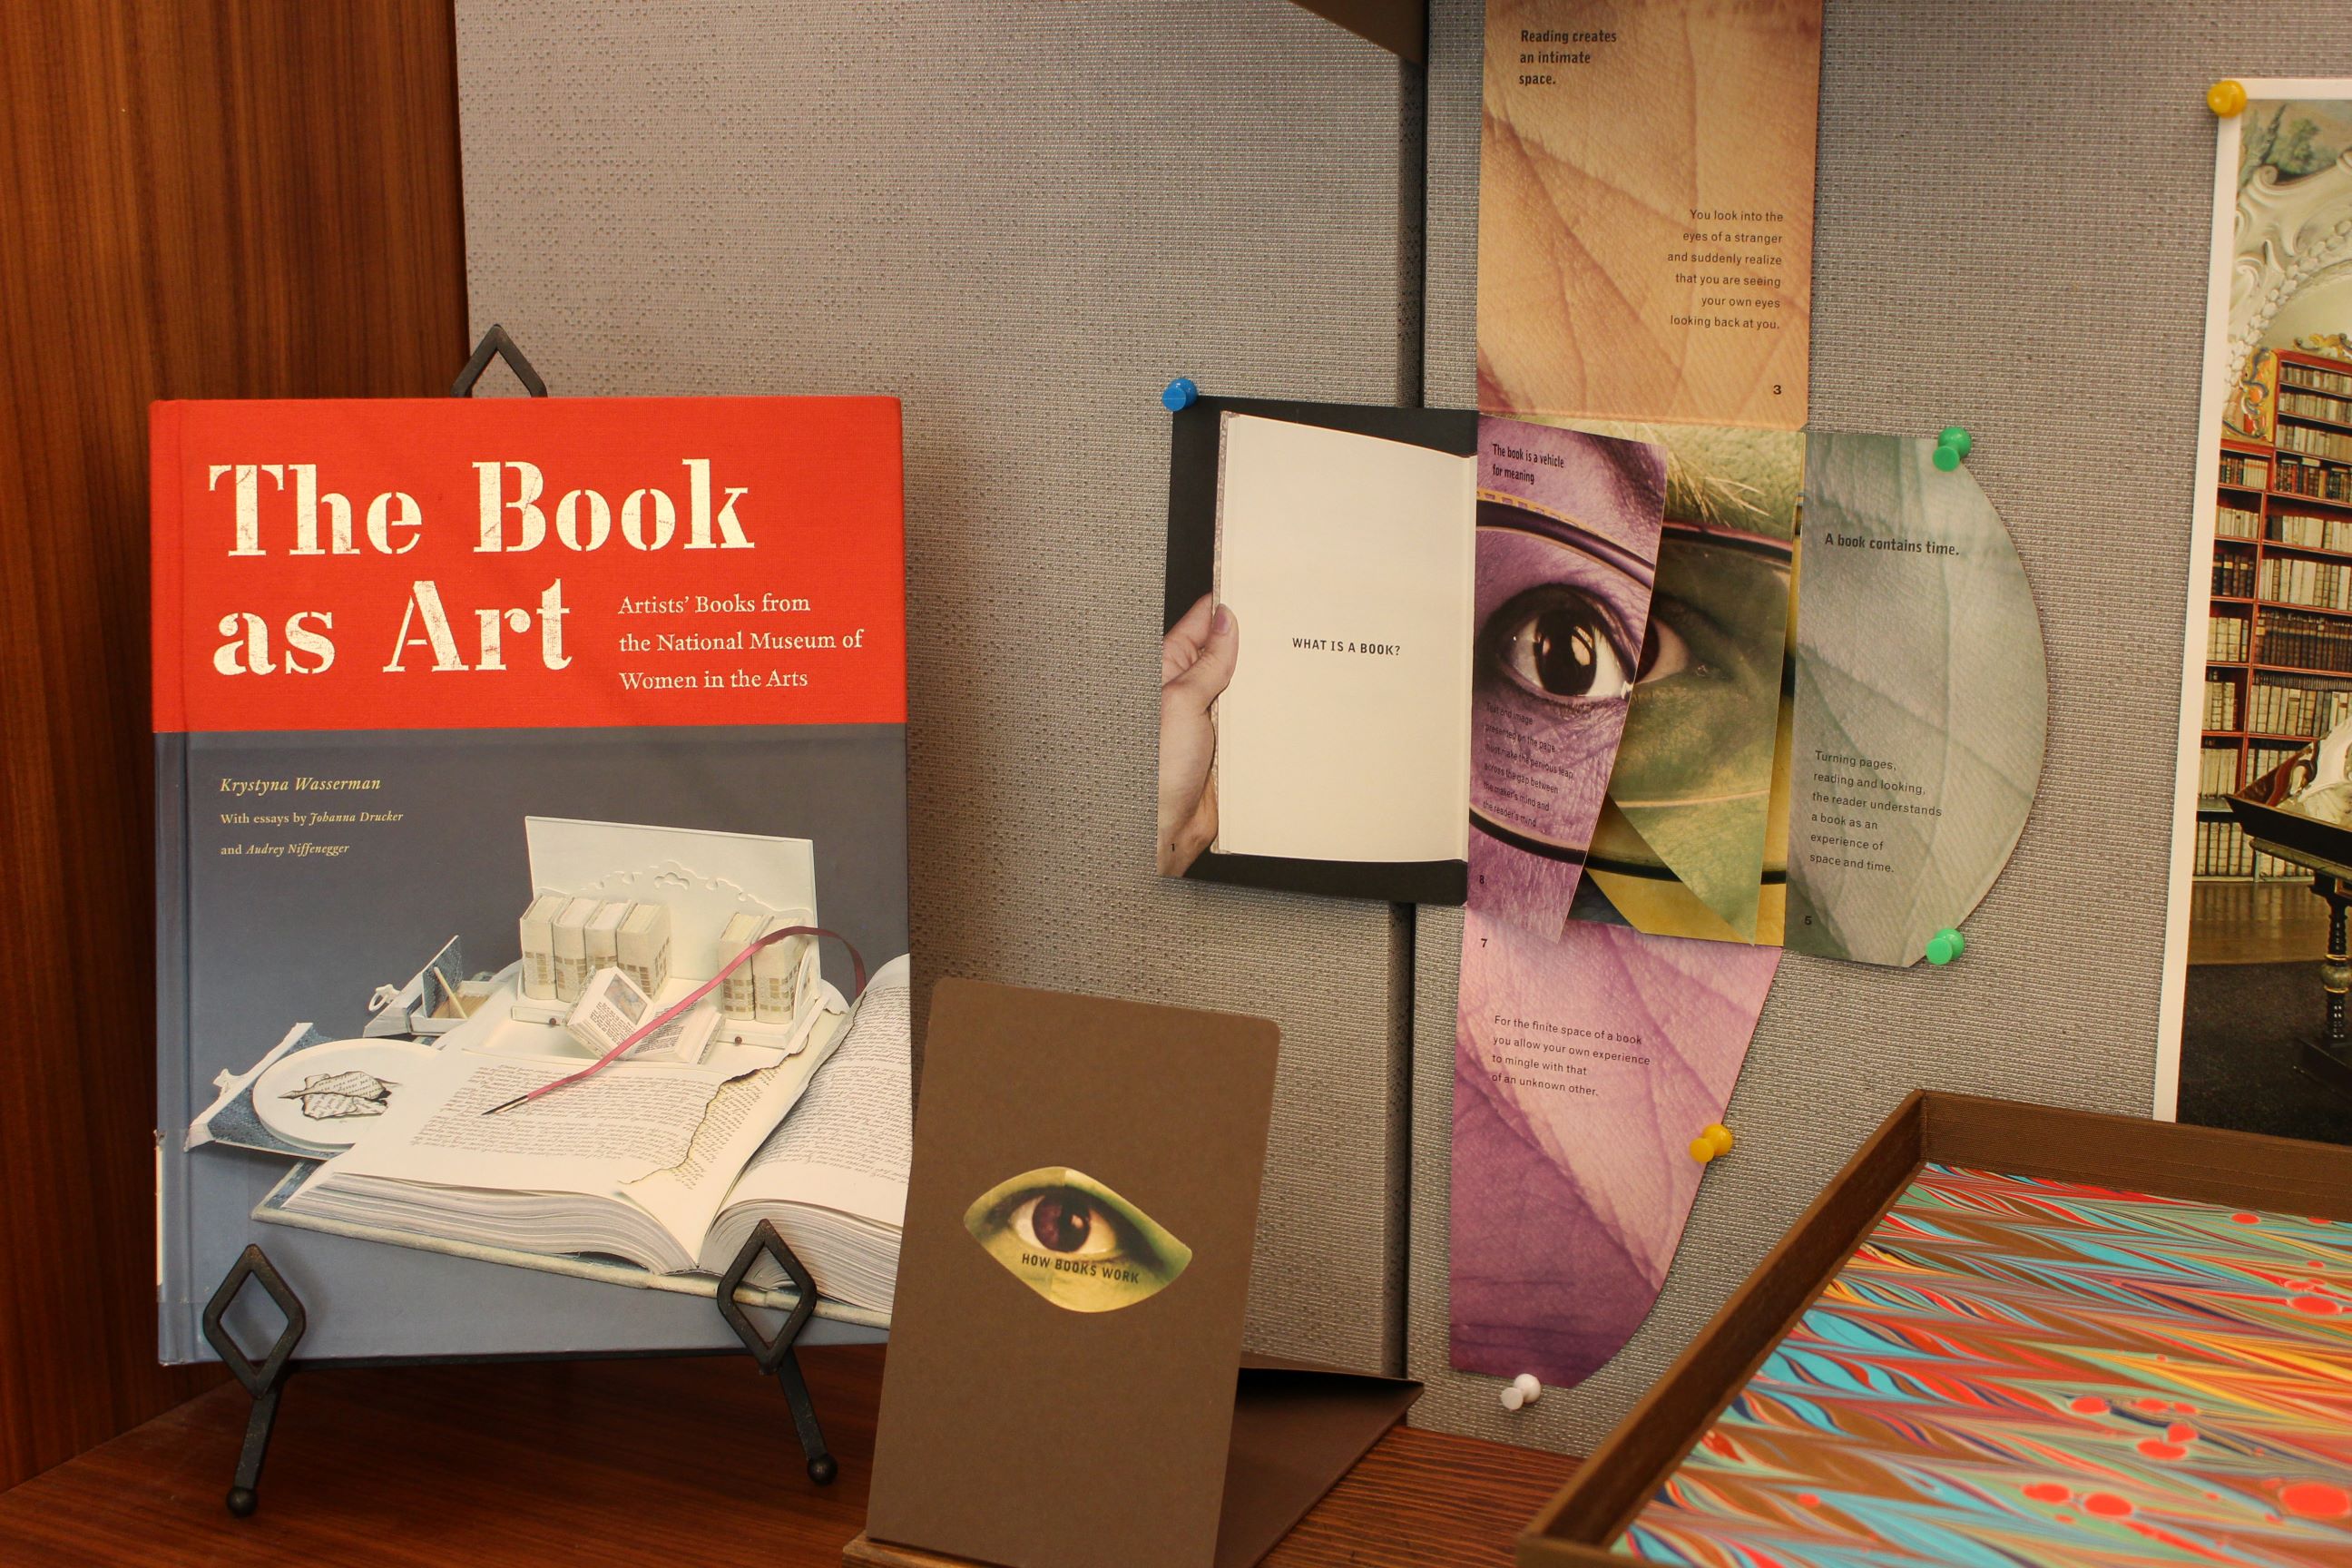 Artists' Books at Play - University of San Diego